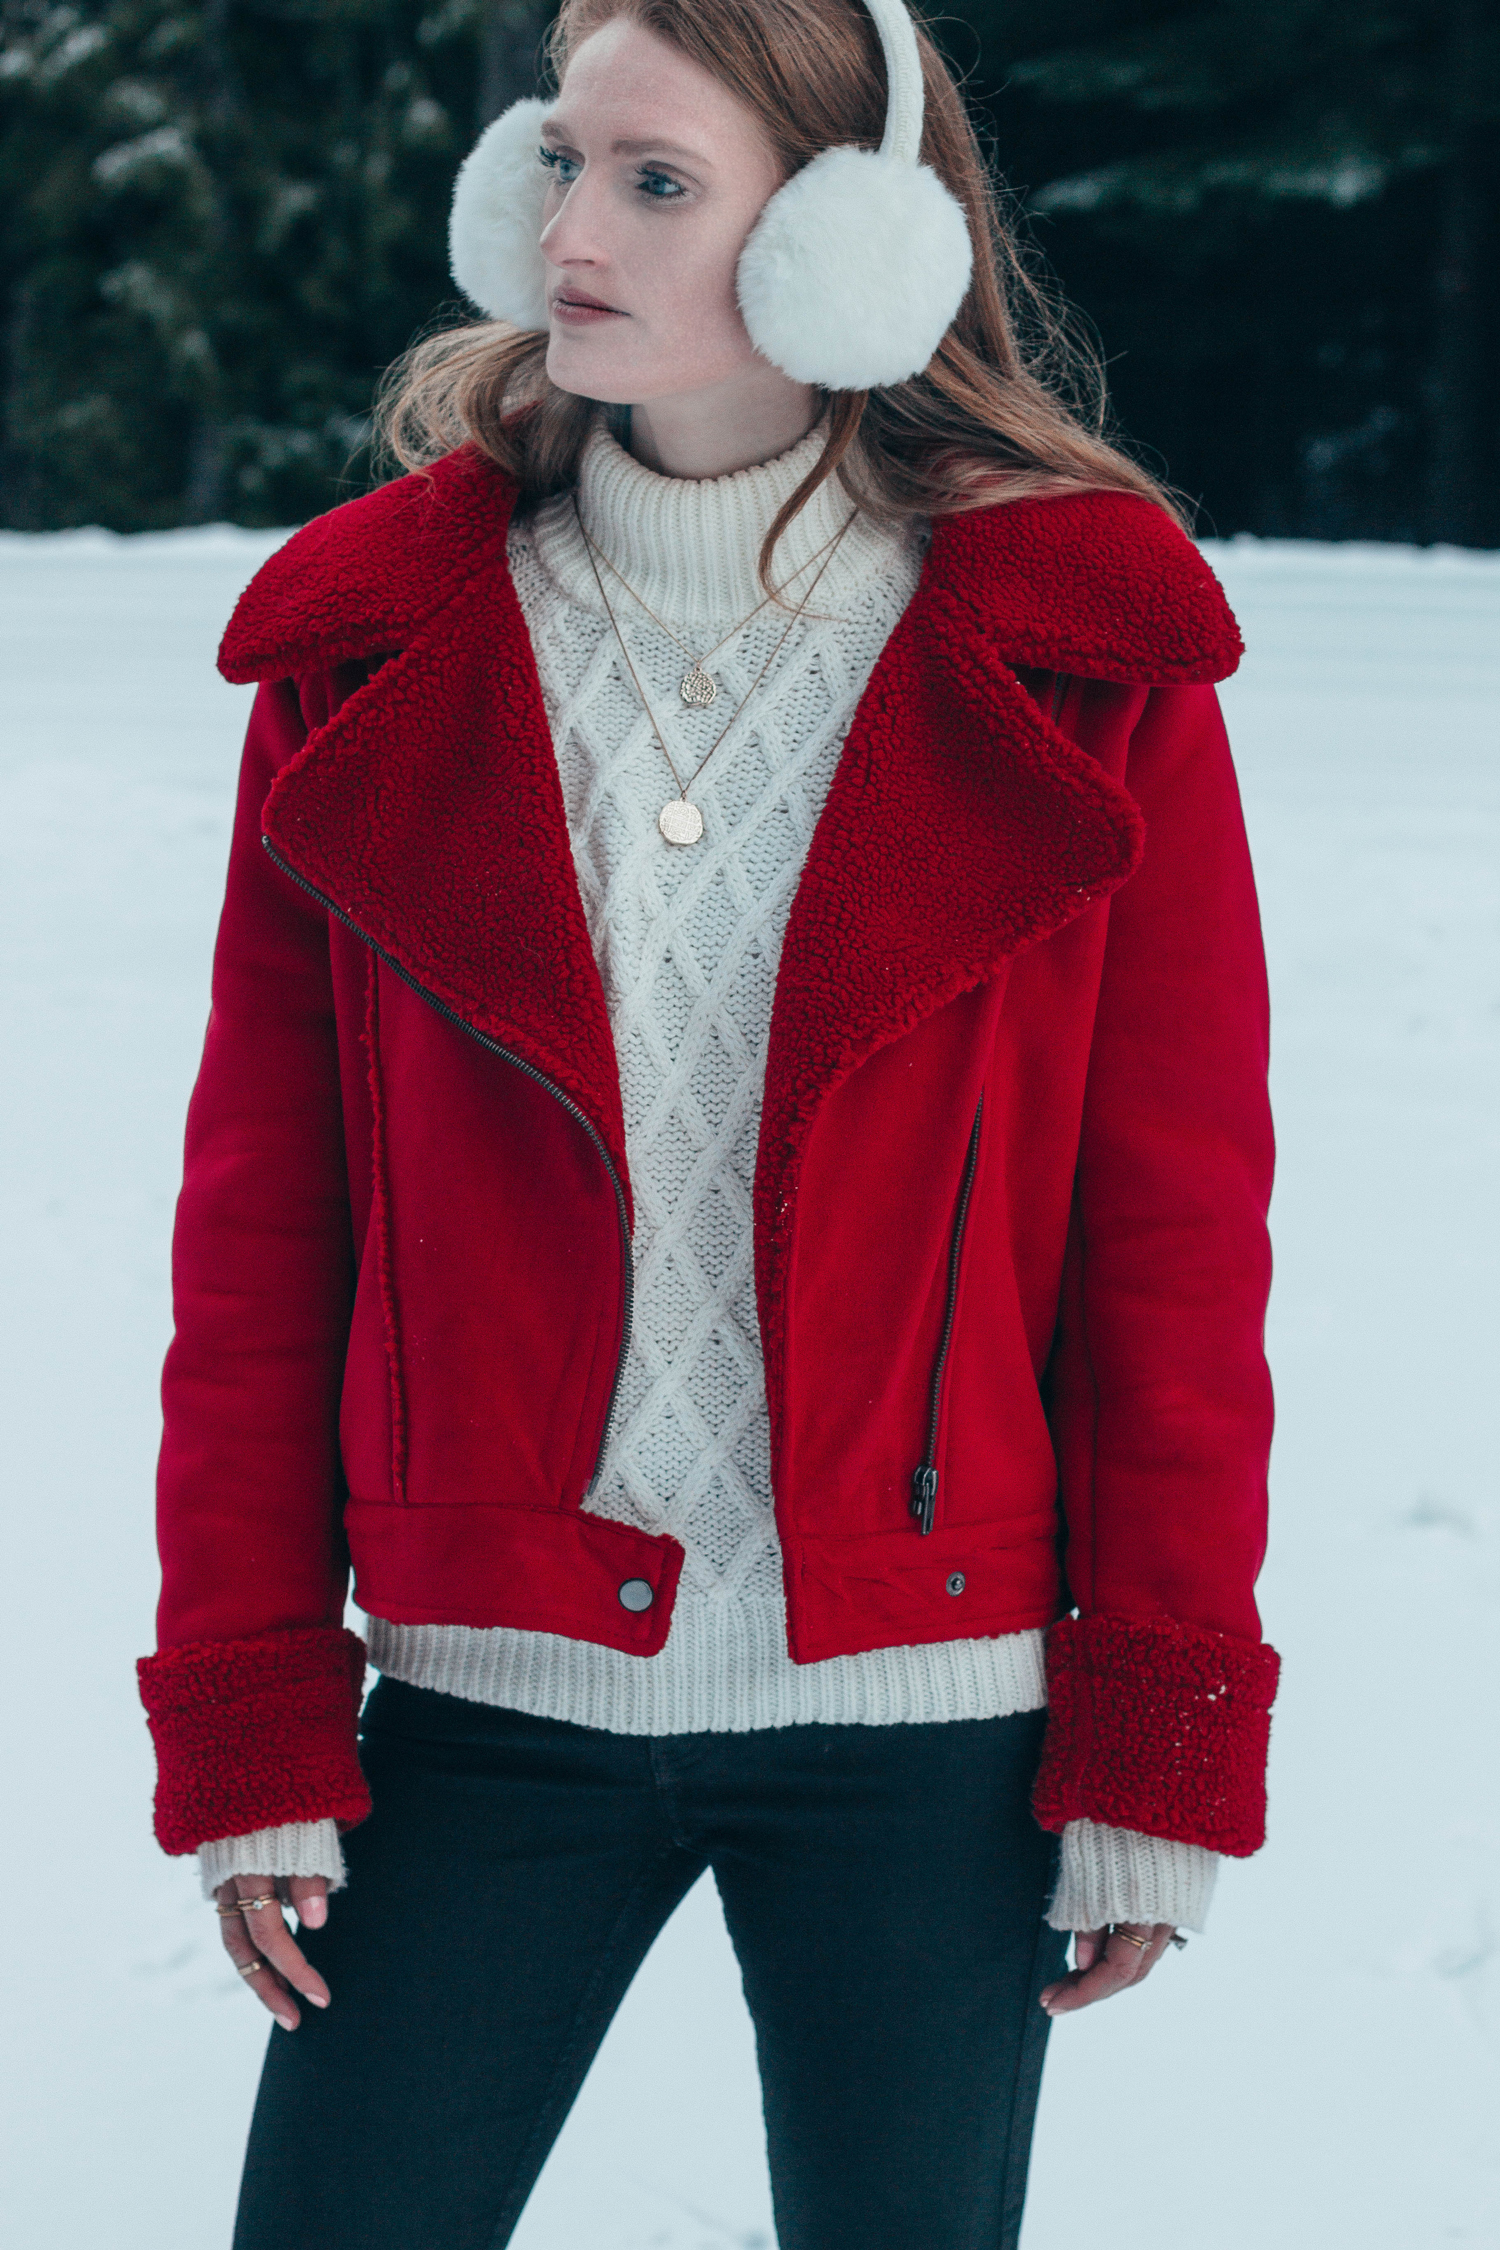 Red Shearling Jacket Winter Wonderland Snow Trees Style Outfit